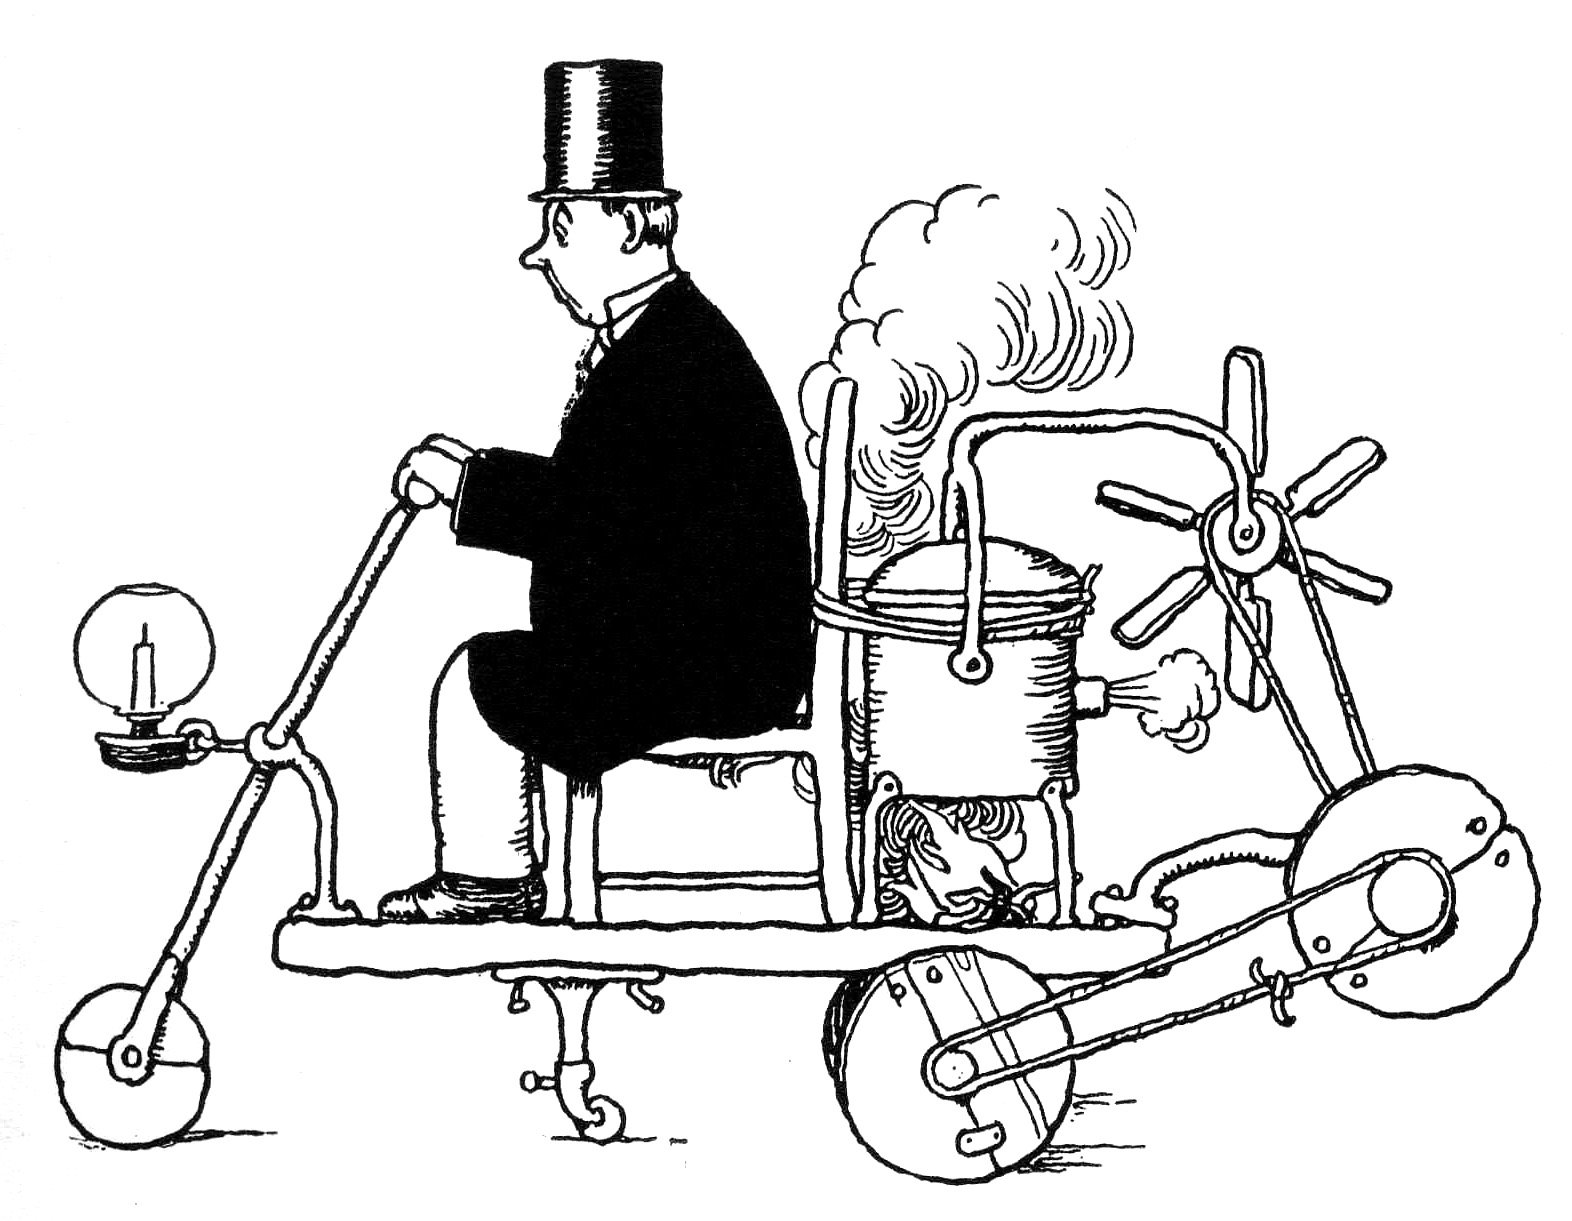 An illustration by W. Heath Robinson featuring a steam-powered tricycle